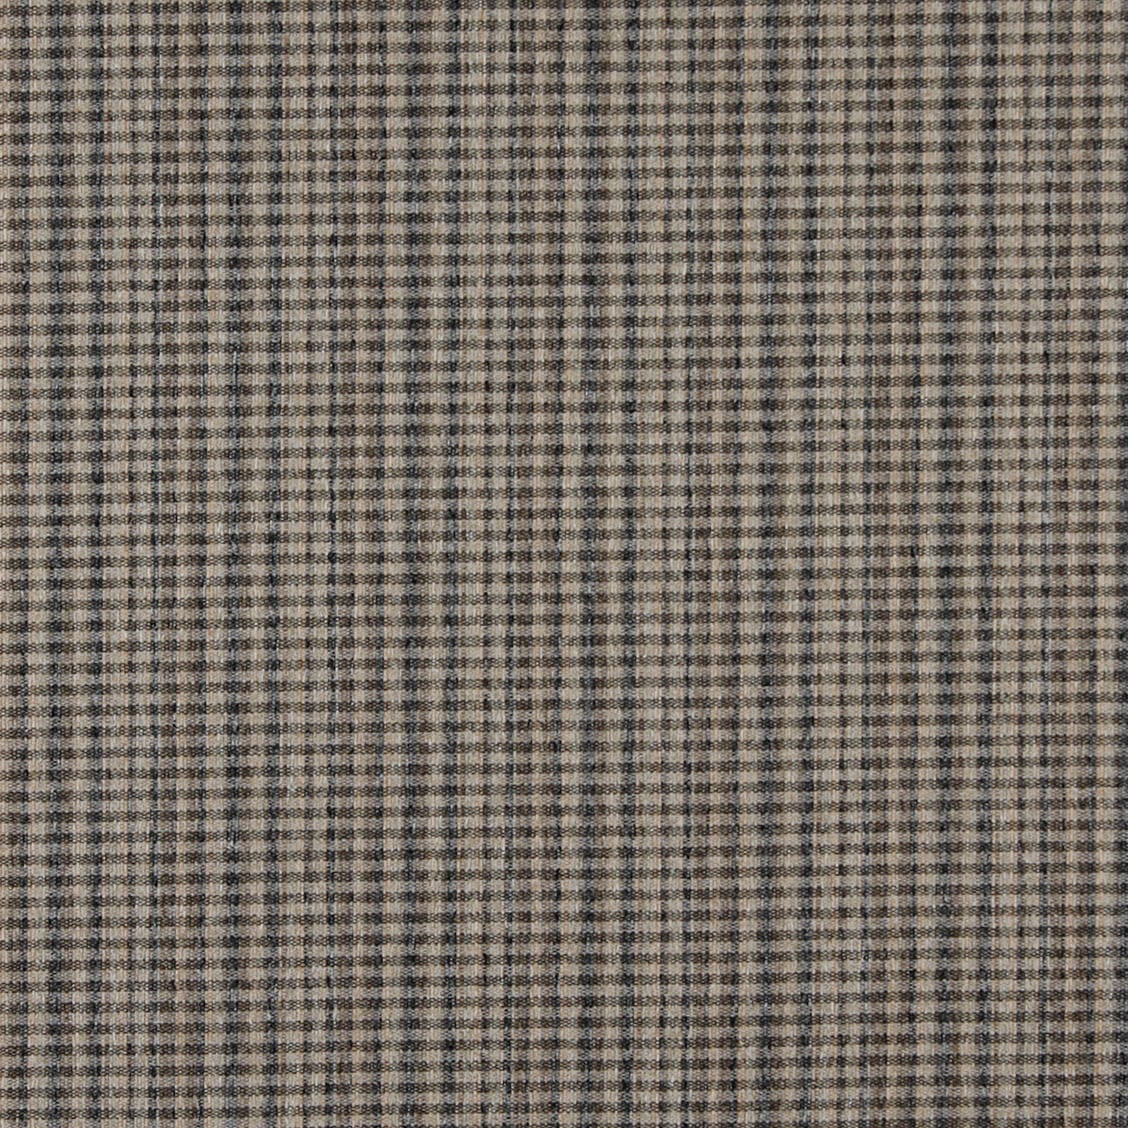 C645 Brown Dark Blue Beige Small Plaid Country Upholstery Fabric by